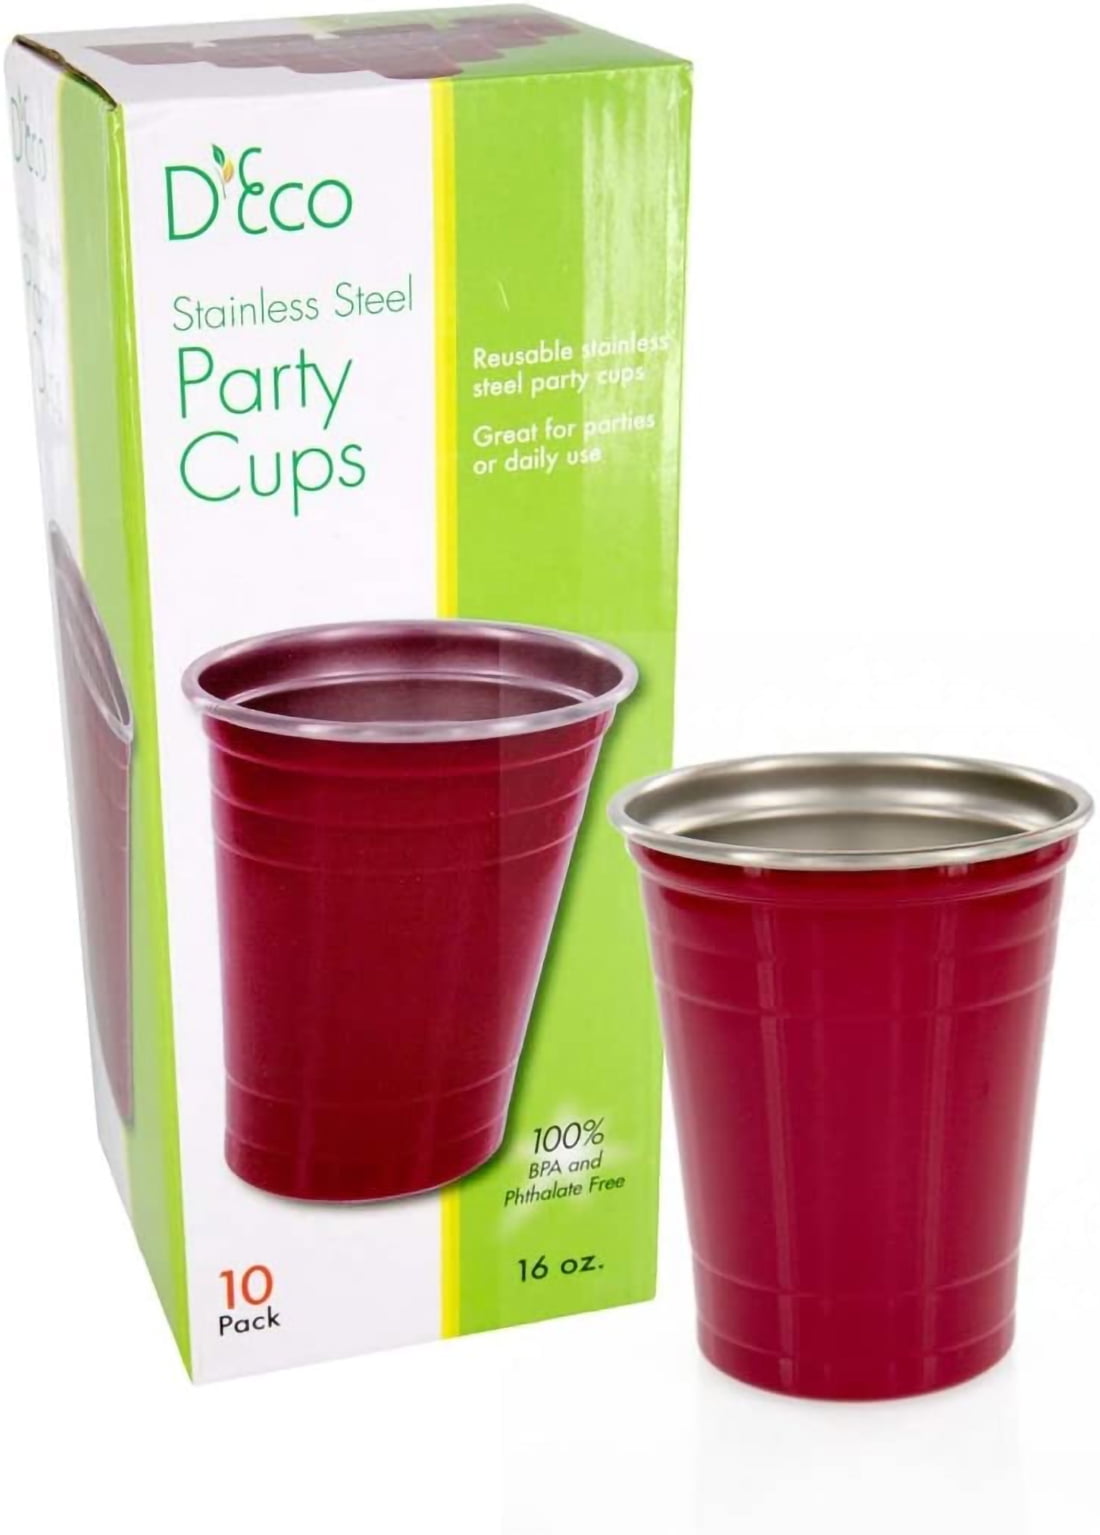 D'eco Reusable Stainless Steel Red Party Cups - 10 Pack Unbreakable 16 oz.  Red Cups - Dishwasher Safe Durable Cups compatible with Solo cups